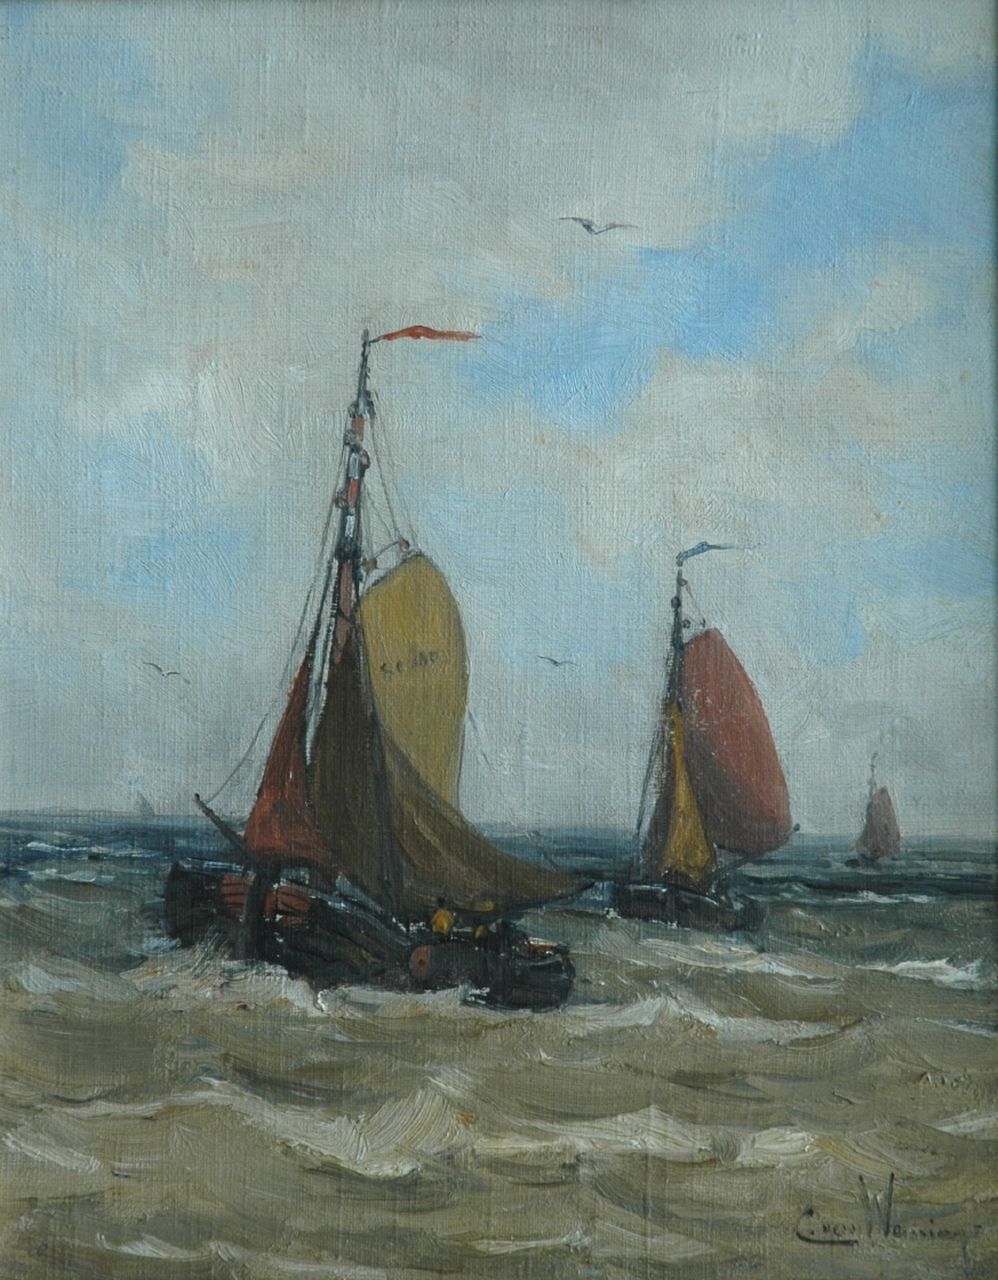 Waning C.A. van | Cornelis Anthonij 'Kees' van Waning, Barges at sea, oil on canvas 35.3 x 28.1 cm, signed l.r.